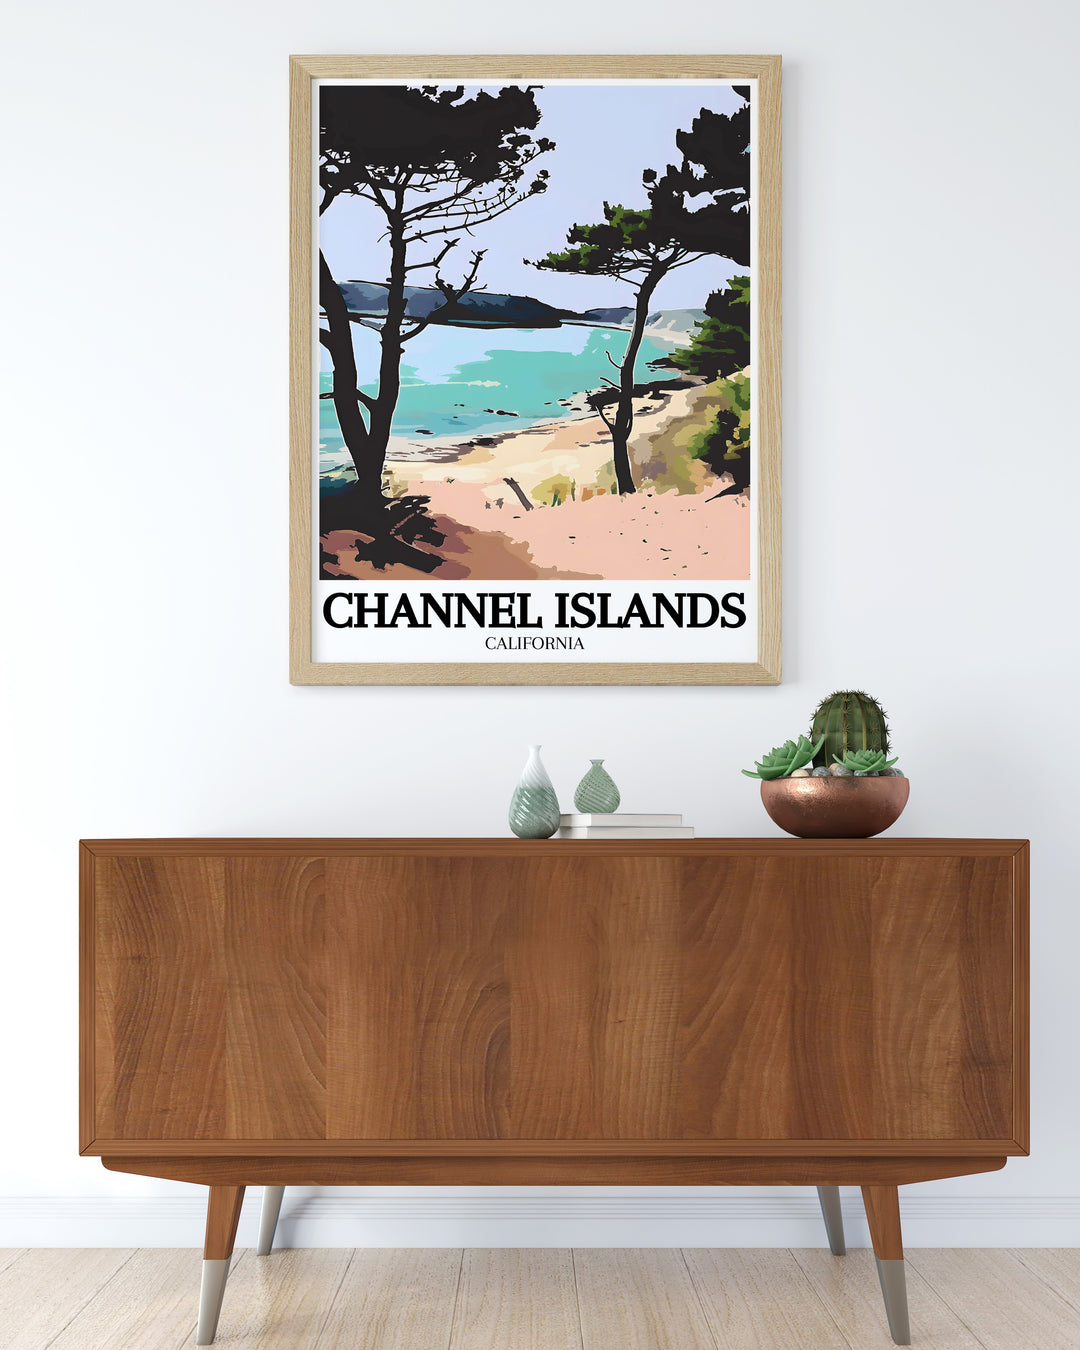 Santa Cruz Island, Painted Cave sea cave print showcasing the picturesque landscapes and iconic landmarks of Channel Islands National Park a great addition to any collection of USA travel prints